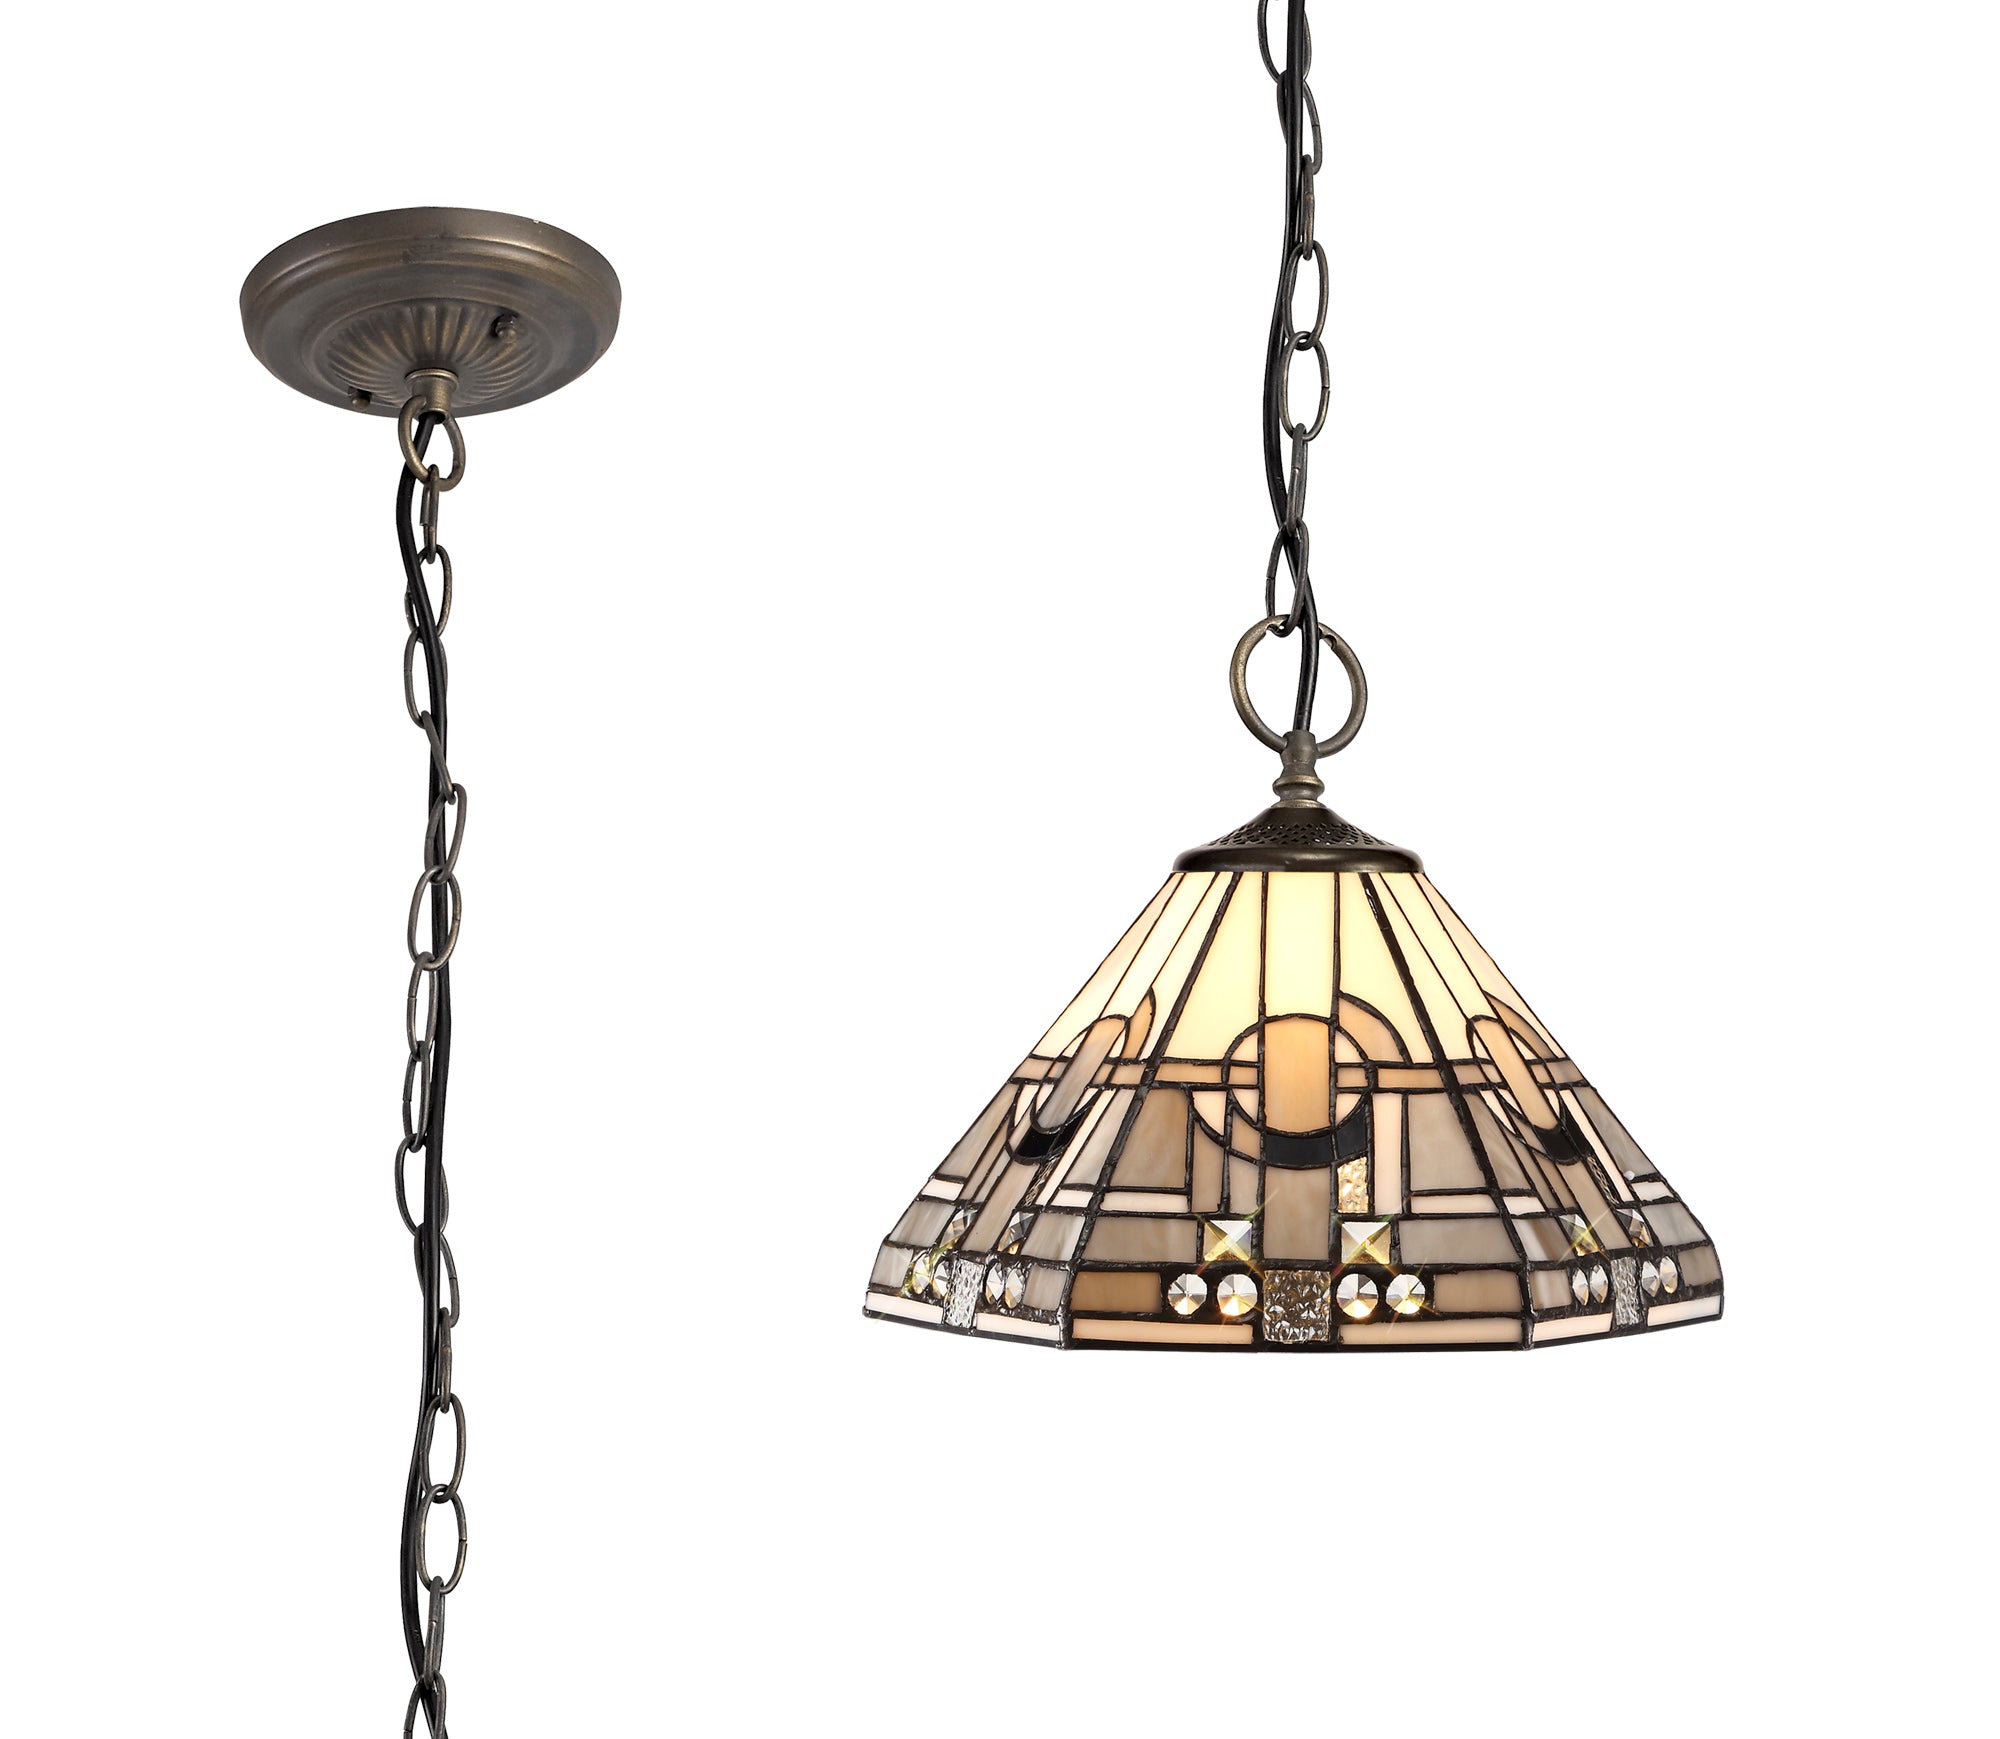 Atek tiffany  3 Light Downlighter Pendant E27 With 30cm Tiffany Shade, White/Grey/Black/Clear Crystal/Aged Antique Brass